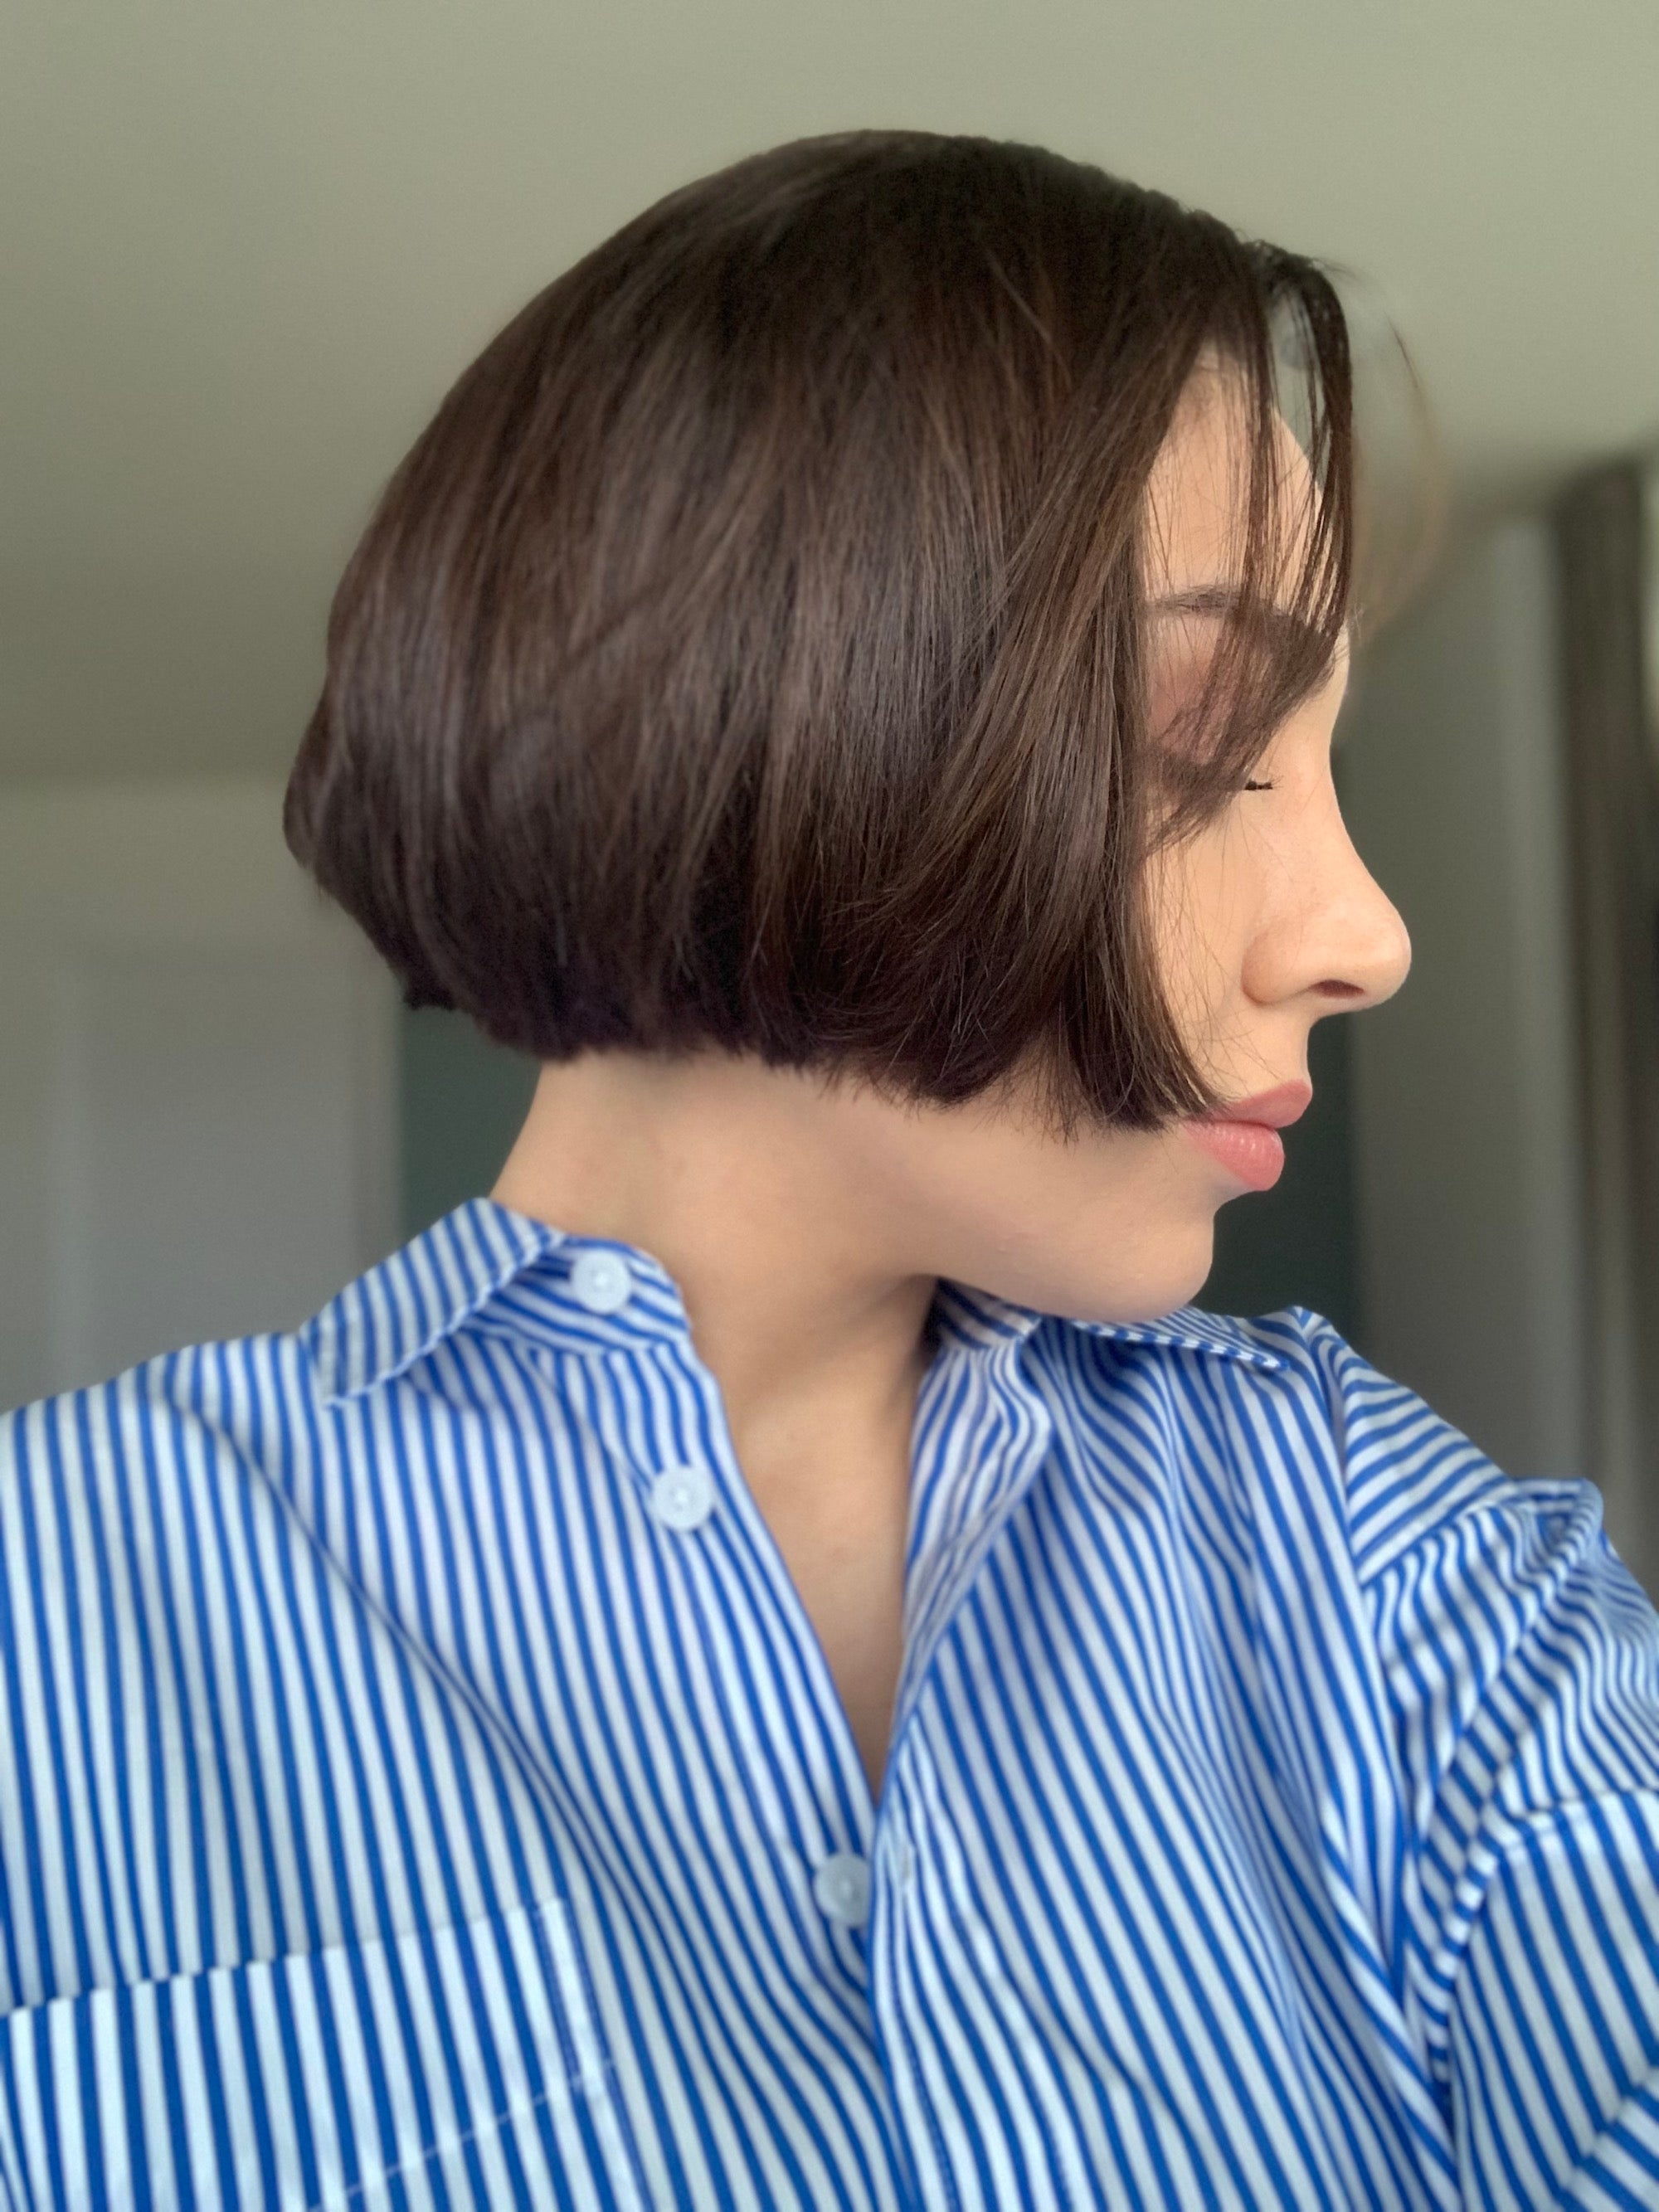 27 short bob hairstyles for black women trending in 2020 - Briefly.co.za